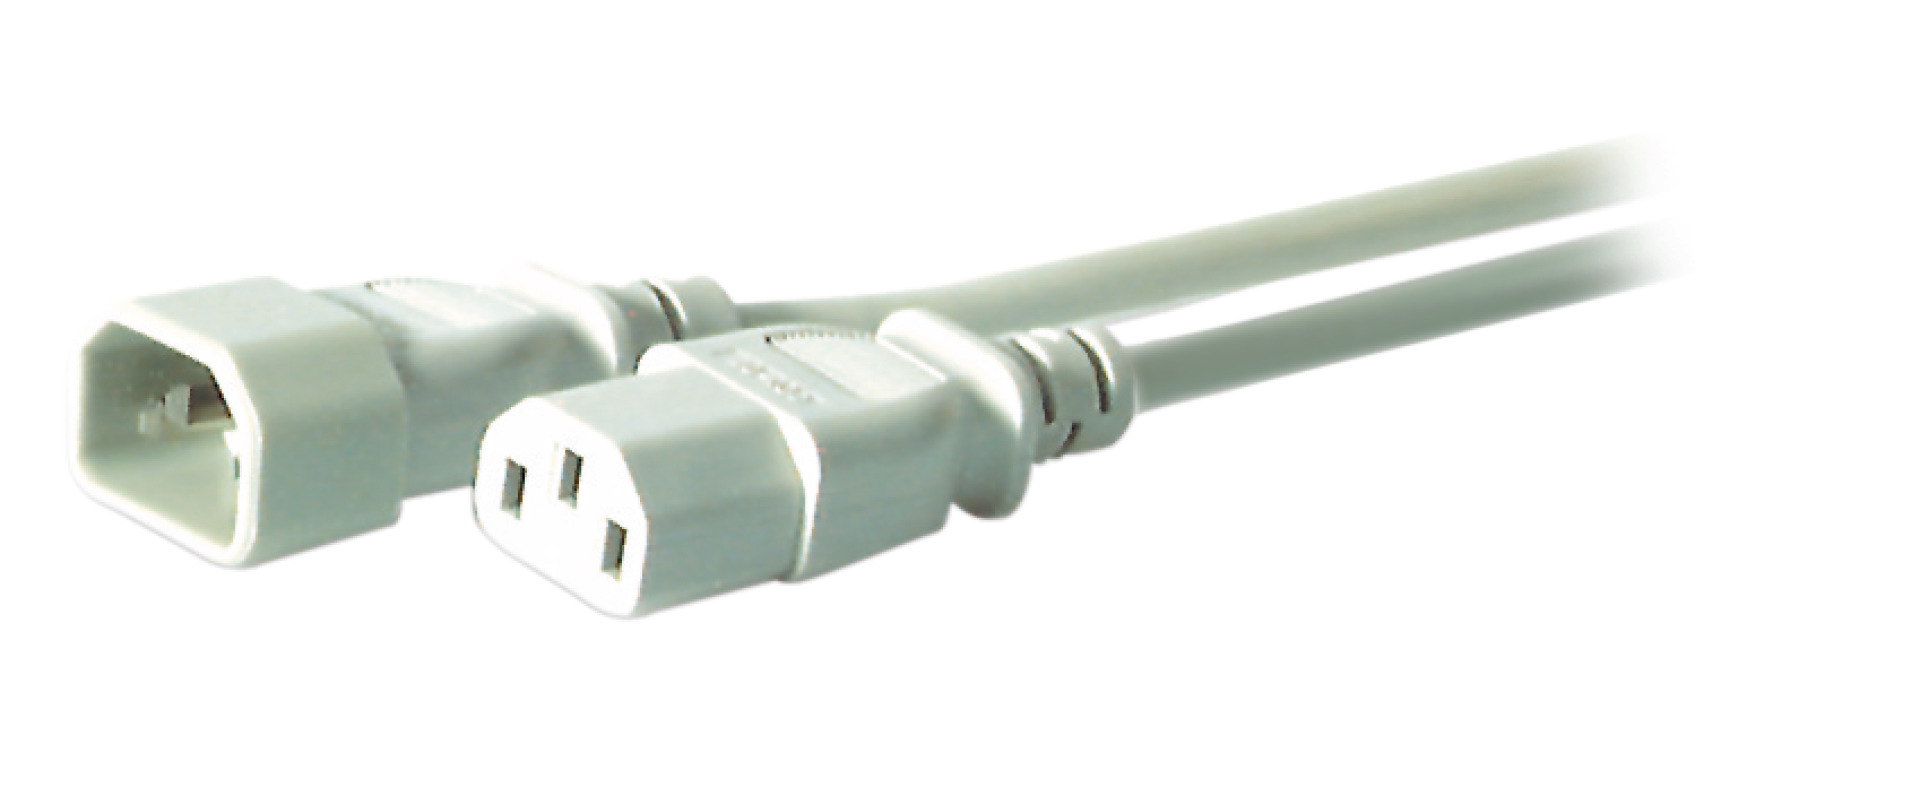 Extension Cable C14 180° - C13 180°, Grey, 5.0 m, 3 x 1.00 mm²